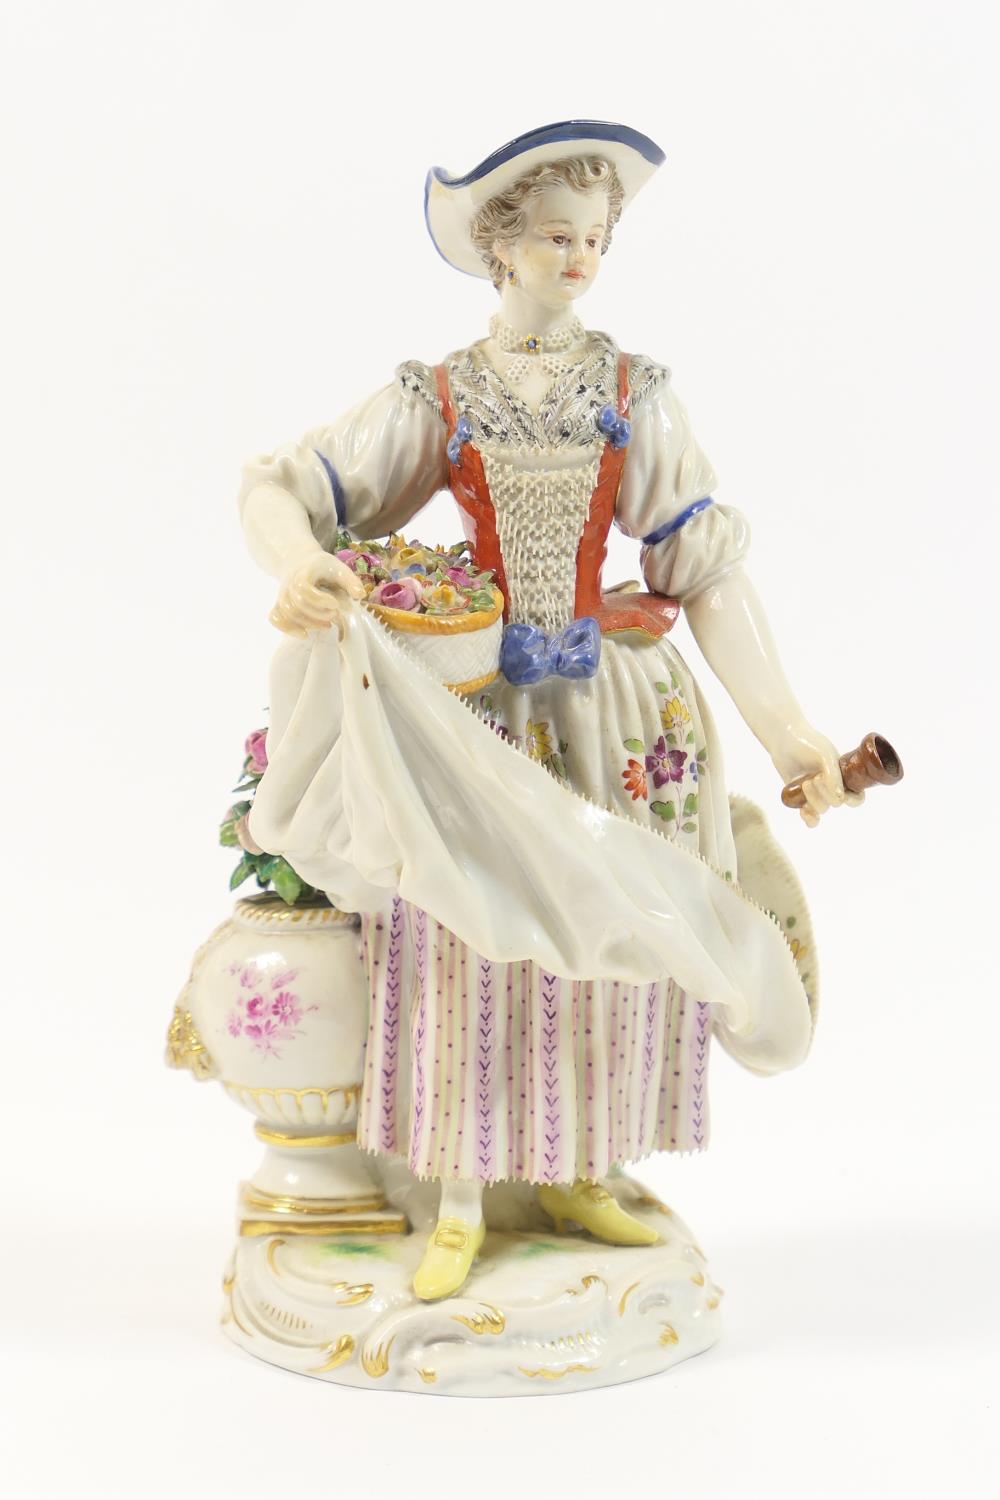 Meissen porcelain figure of a gardener, modelled holding a basket of flowers and with partial posy